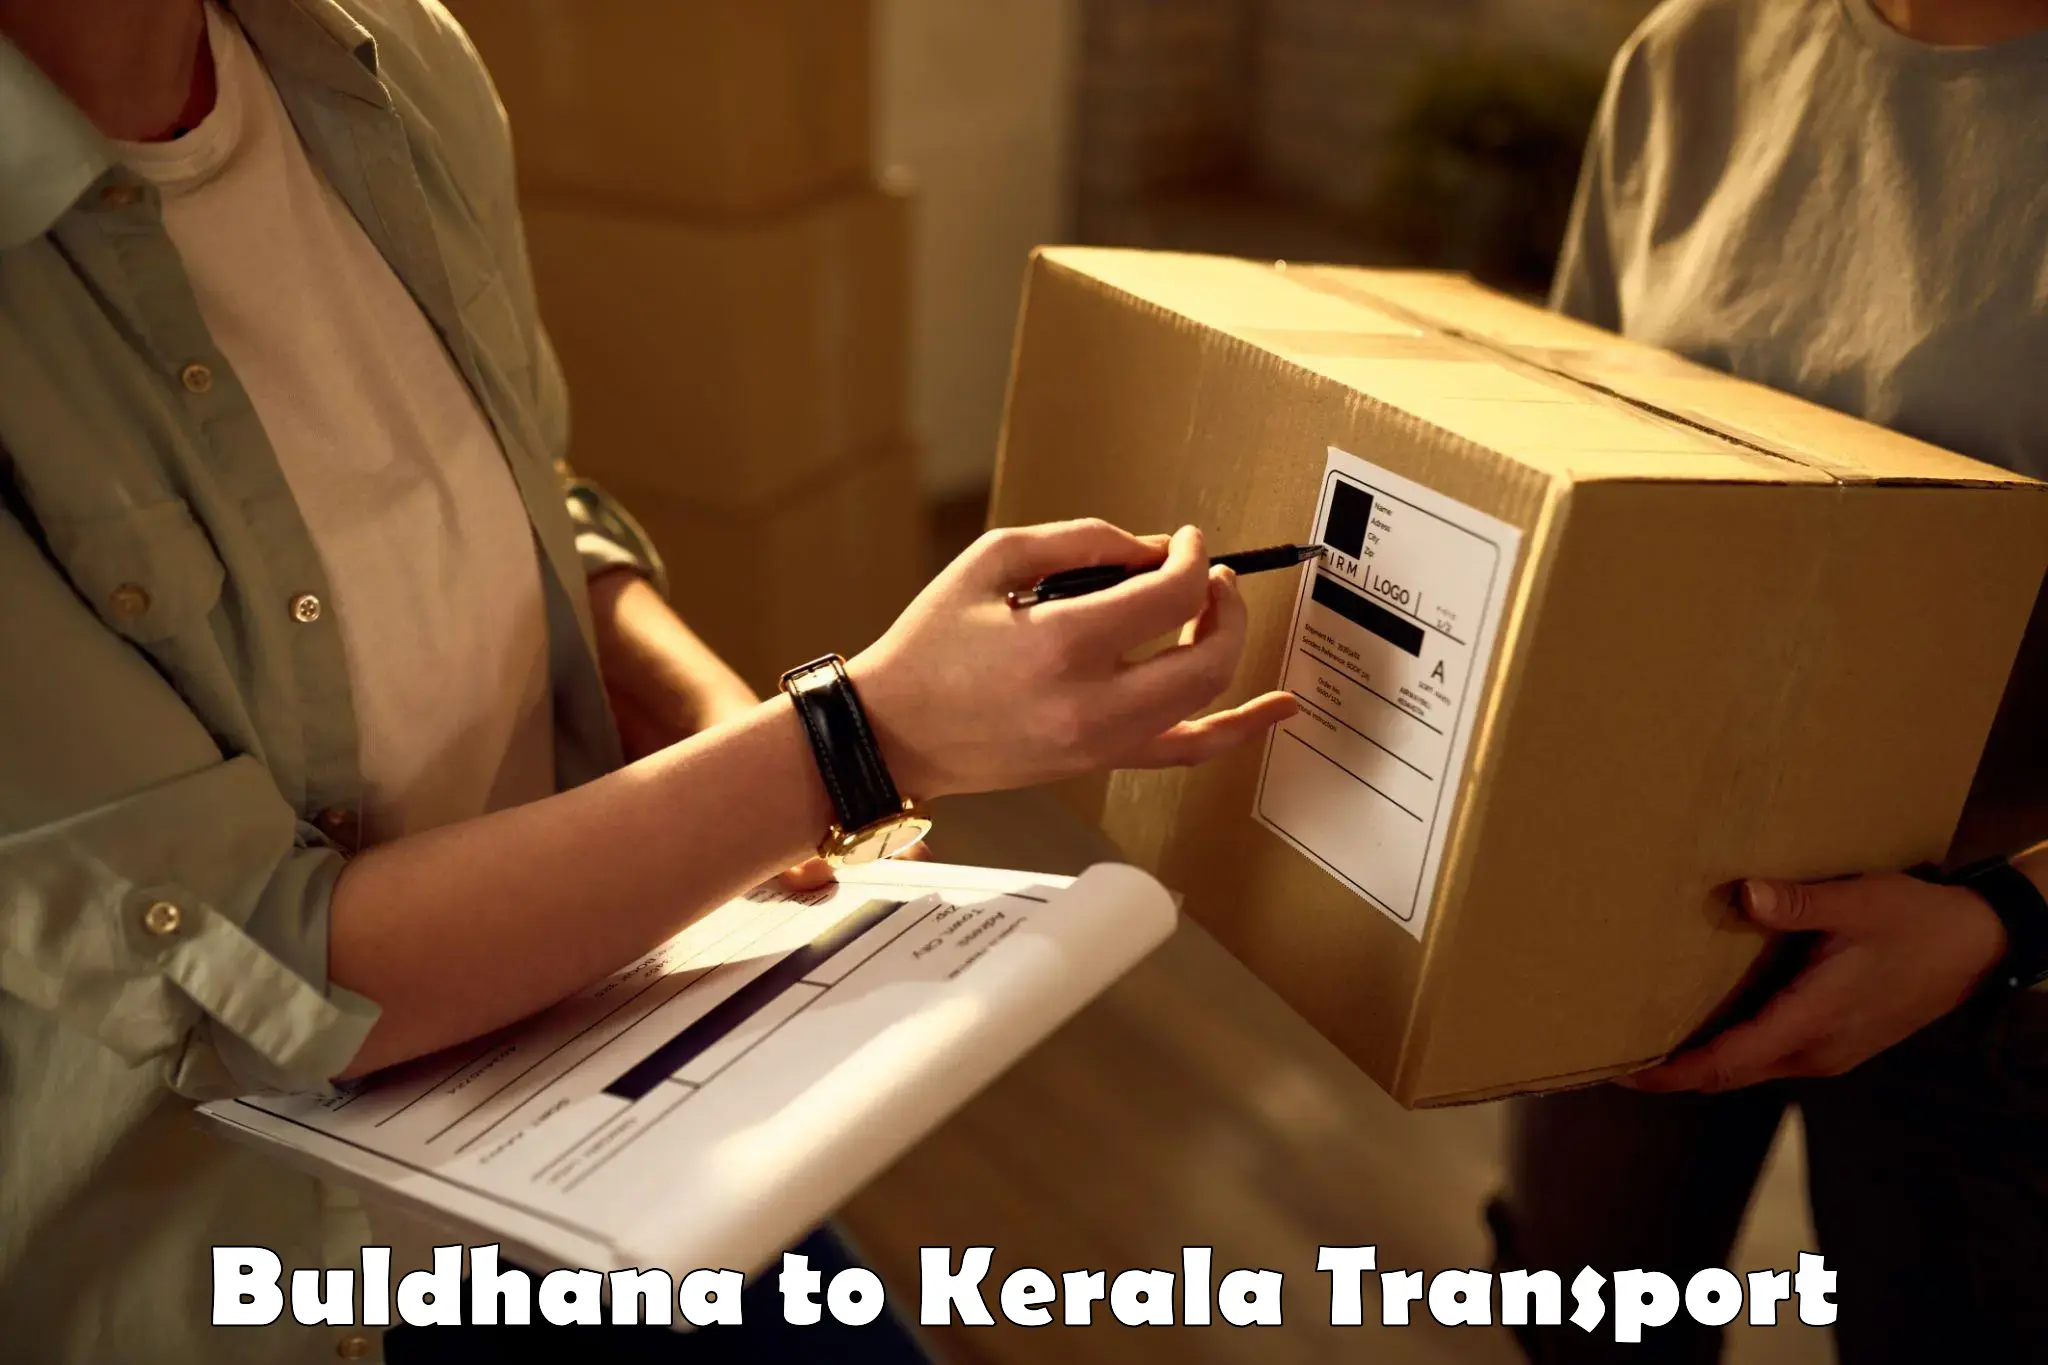 Container transport service Buldhana to Kalpetta